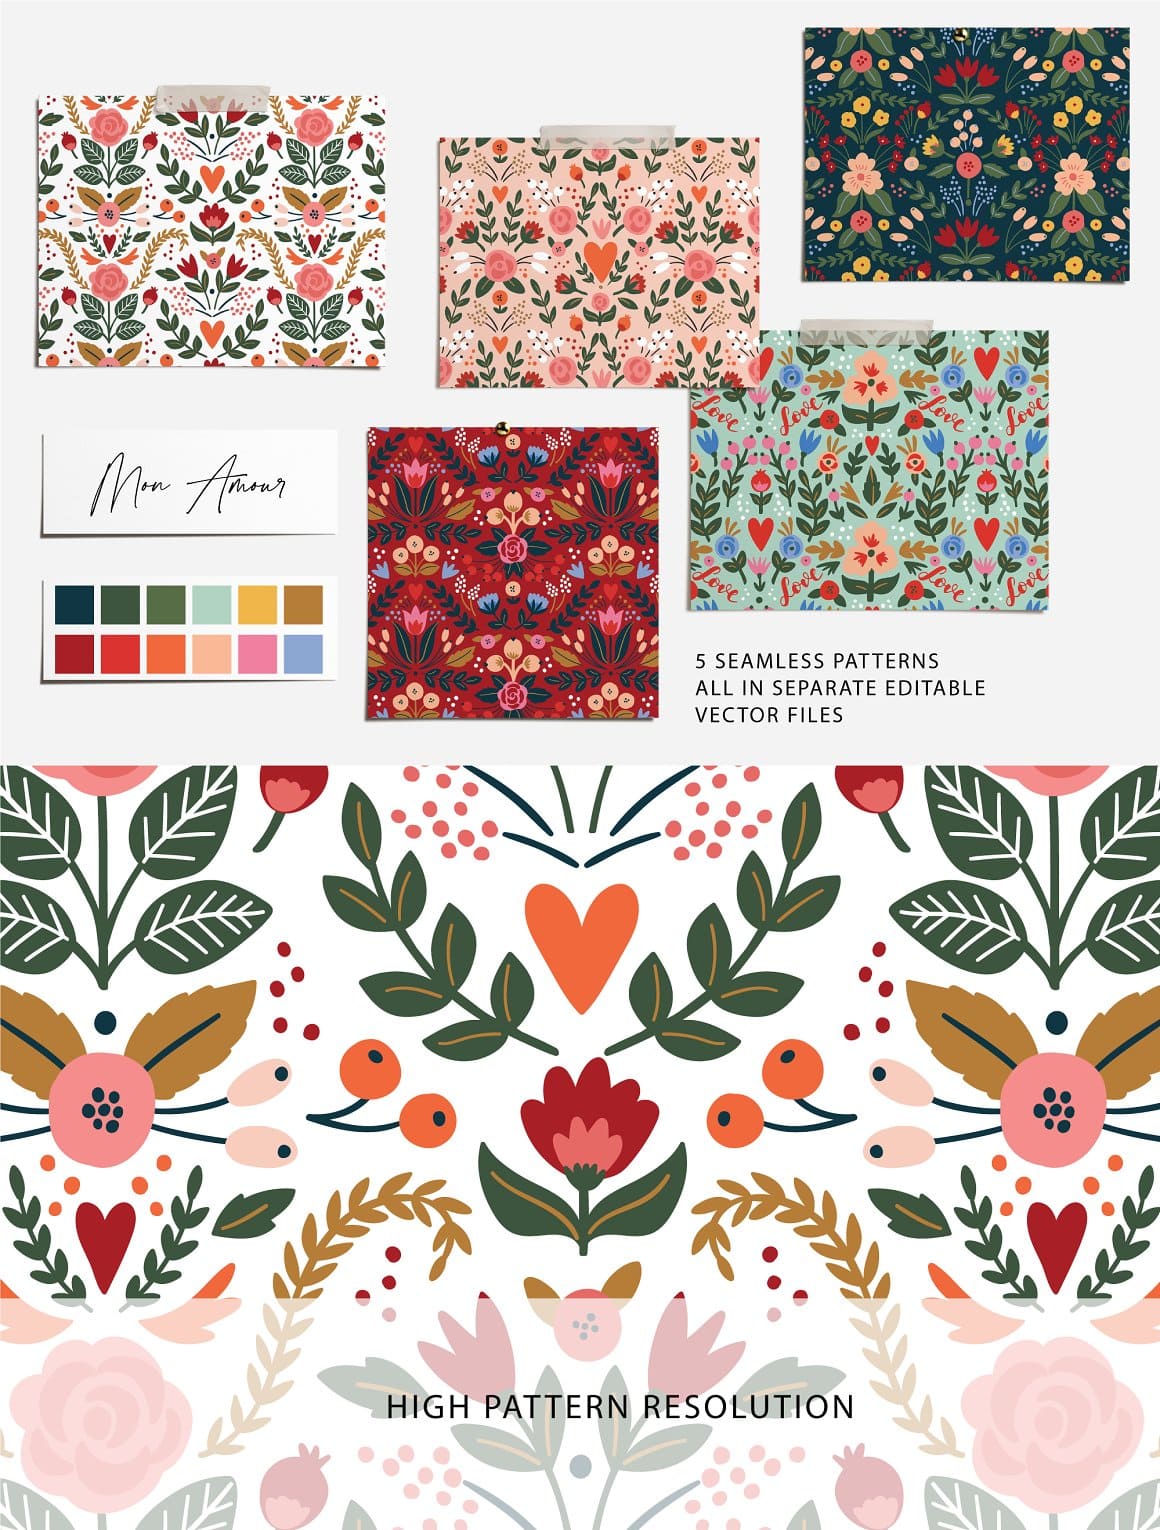 5 seamless patterns all in separate editable vector files.